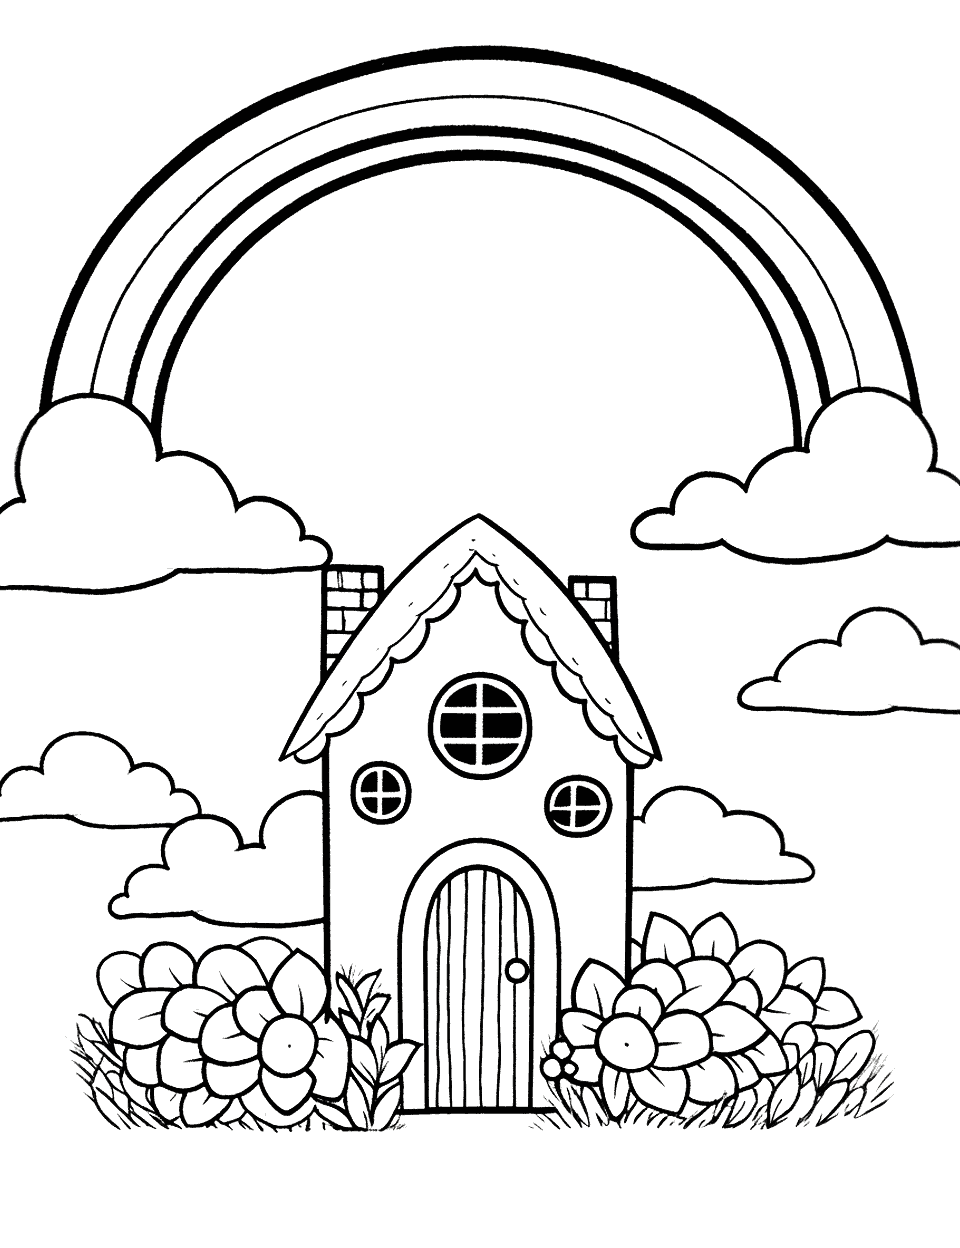 Rainbow Over the House Coloring Page - A cute little house with a beautiful rainbow overhead.